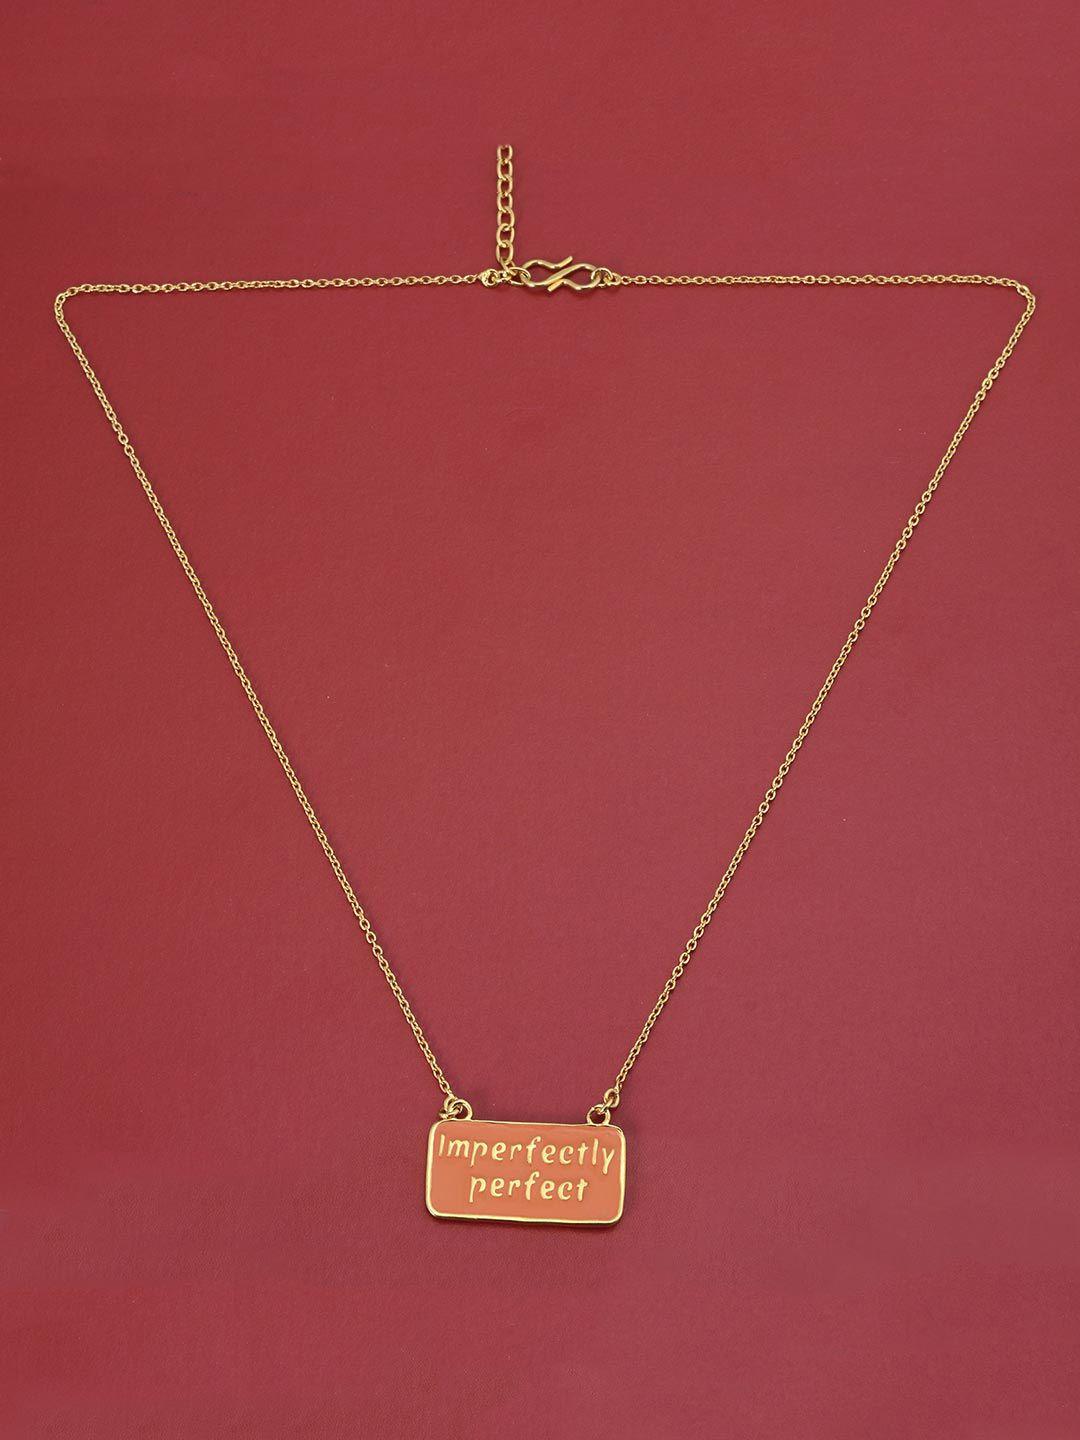 tistabene gold-plated & orange imperfectly perfect pendant with chain